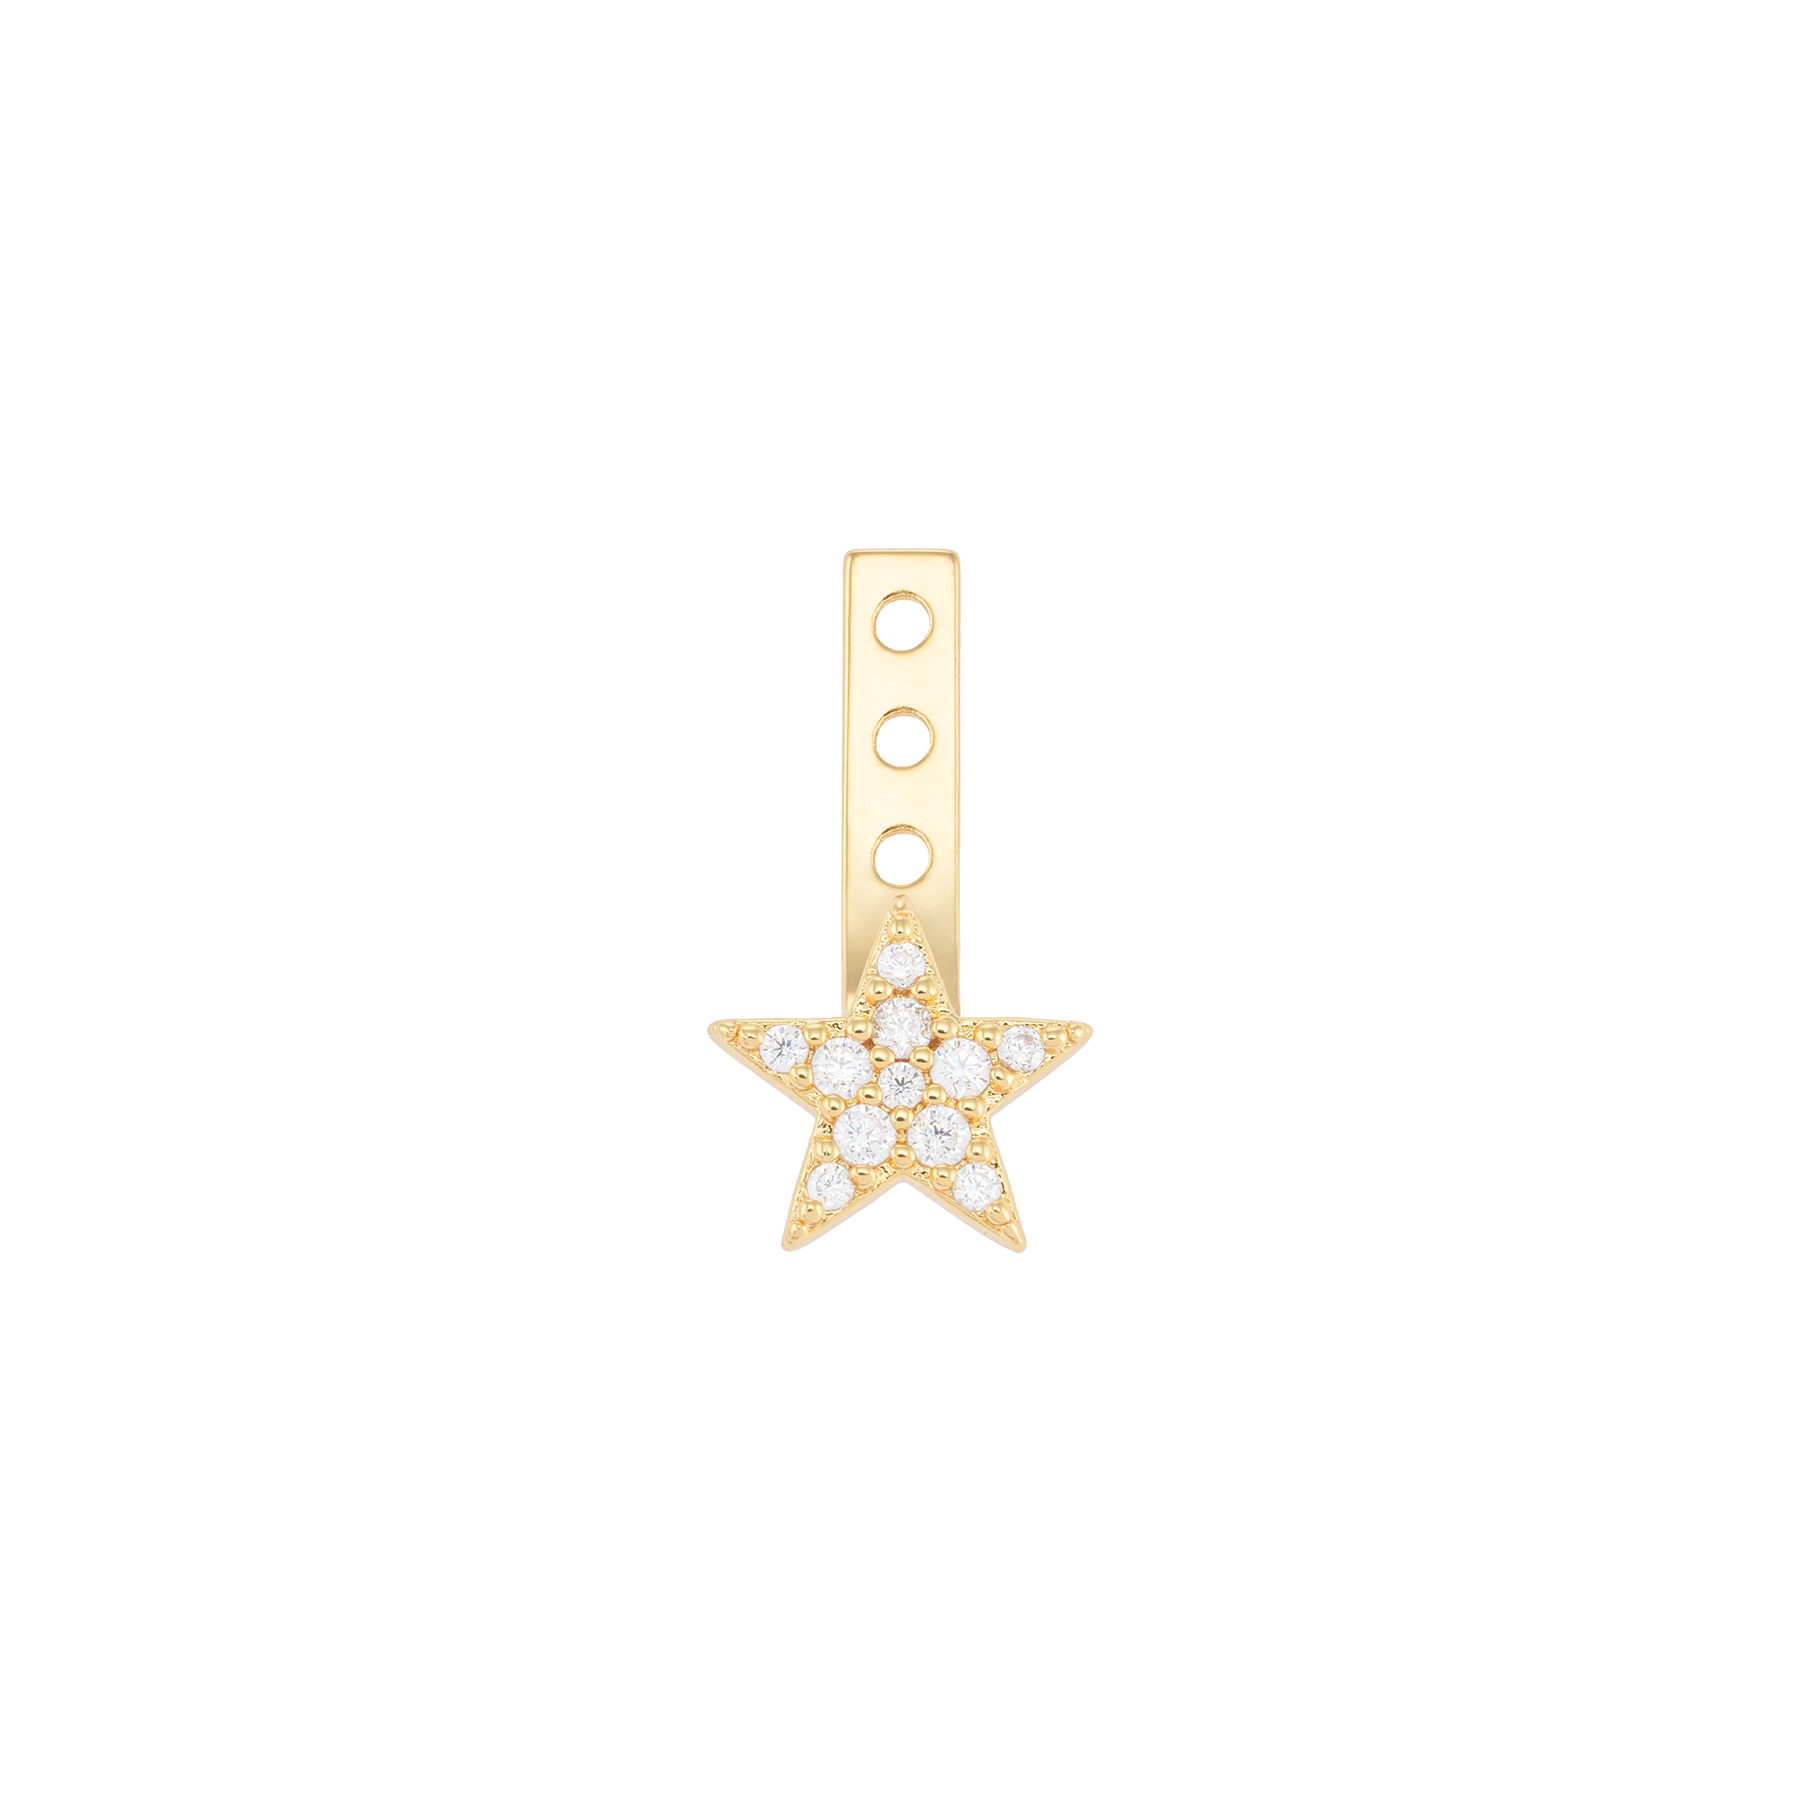 Image of Stud charm no. 18 from Emilia by Bon Dep